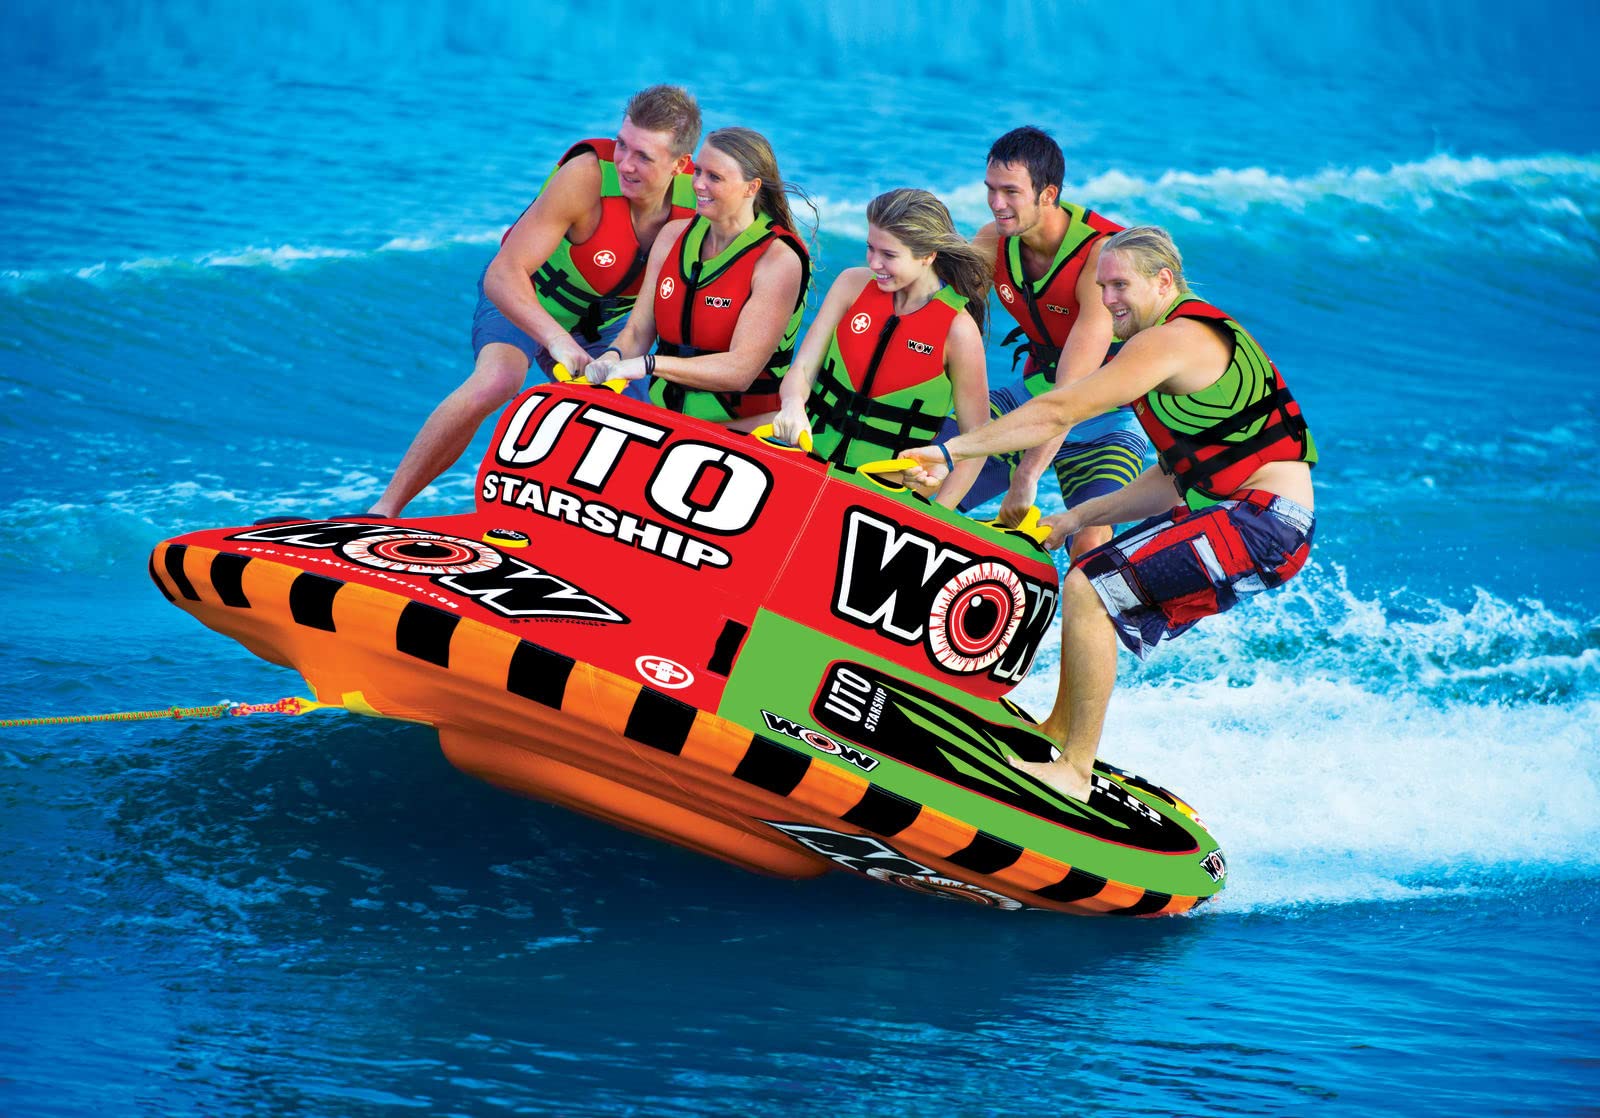 WOW World of Watersports UTO towable